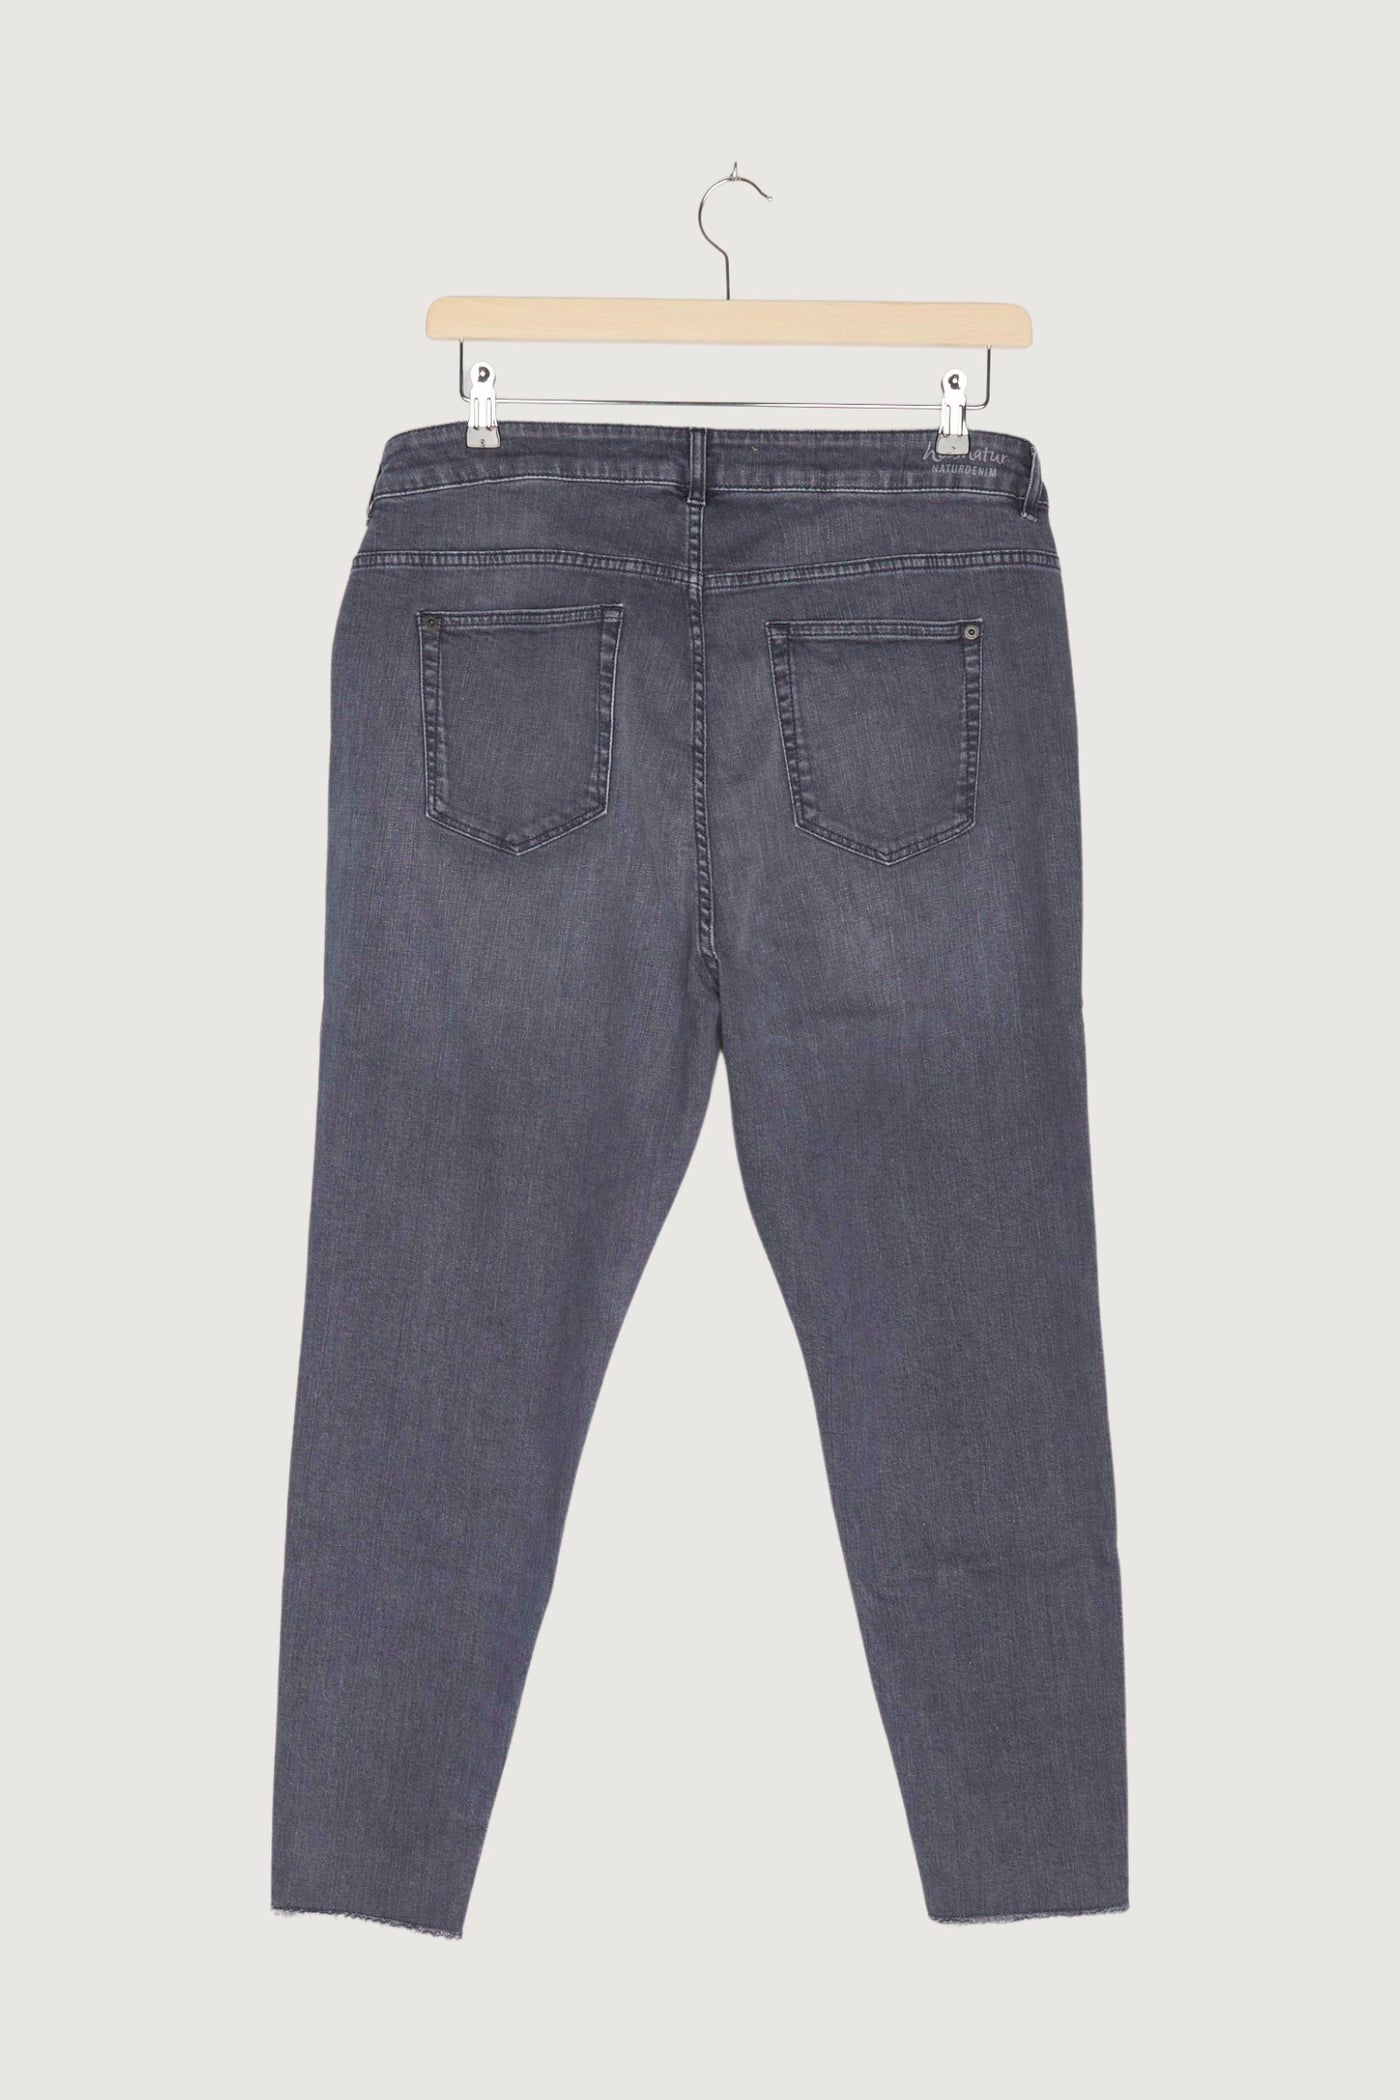 Secondhand BetterRecycling Jeans Skinny Fit